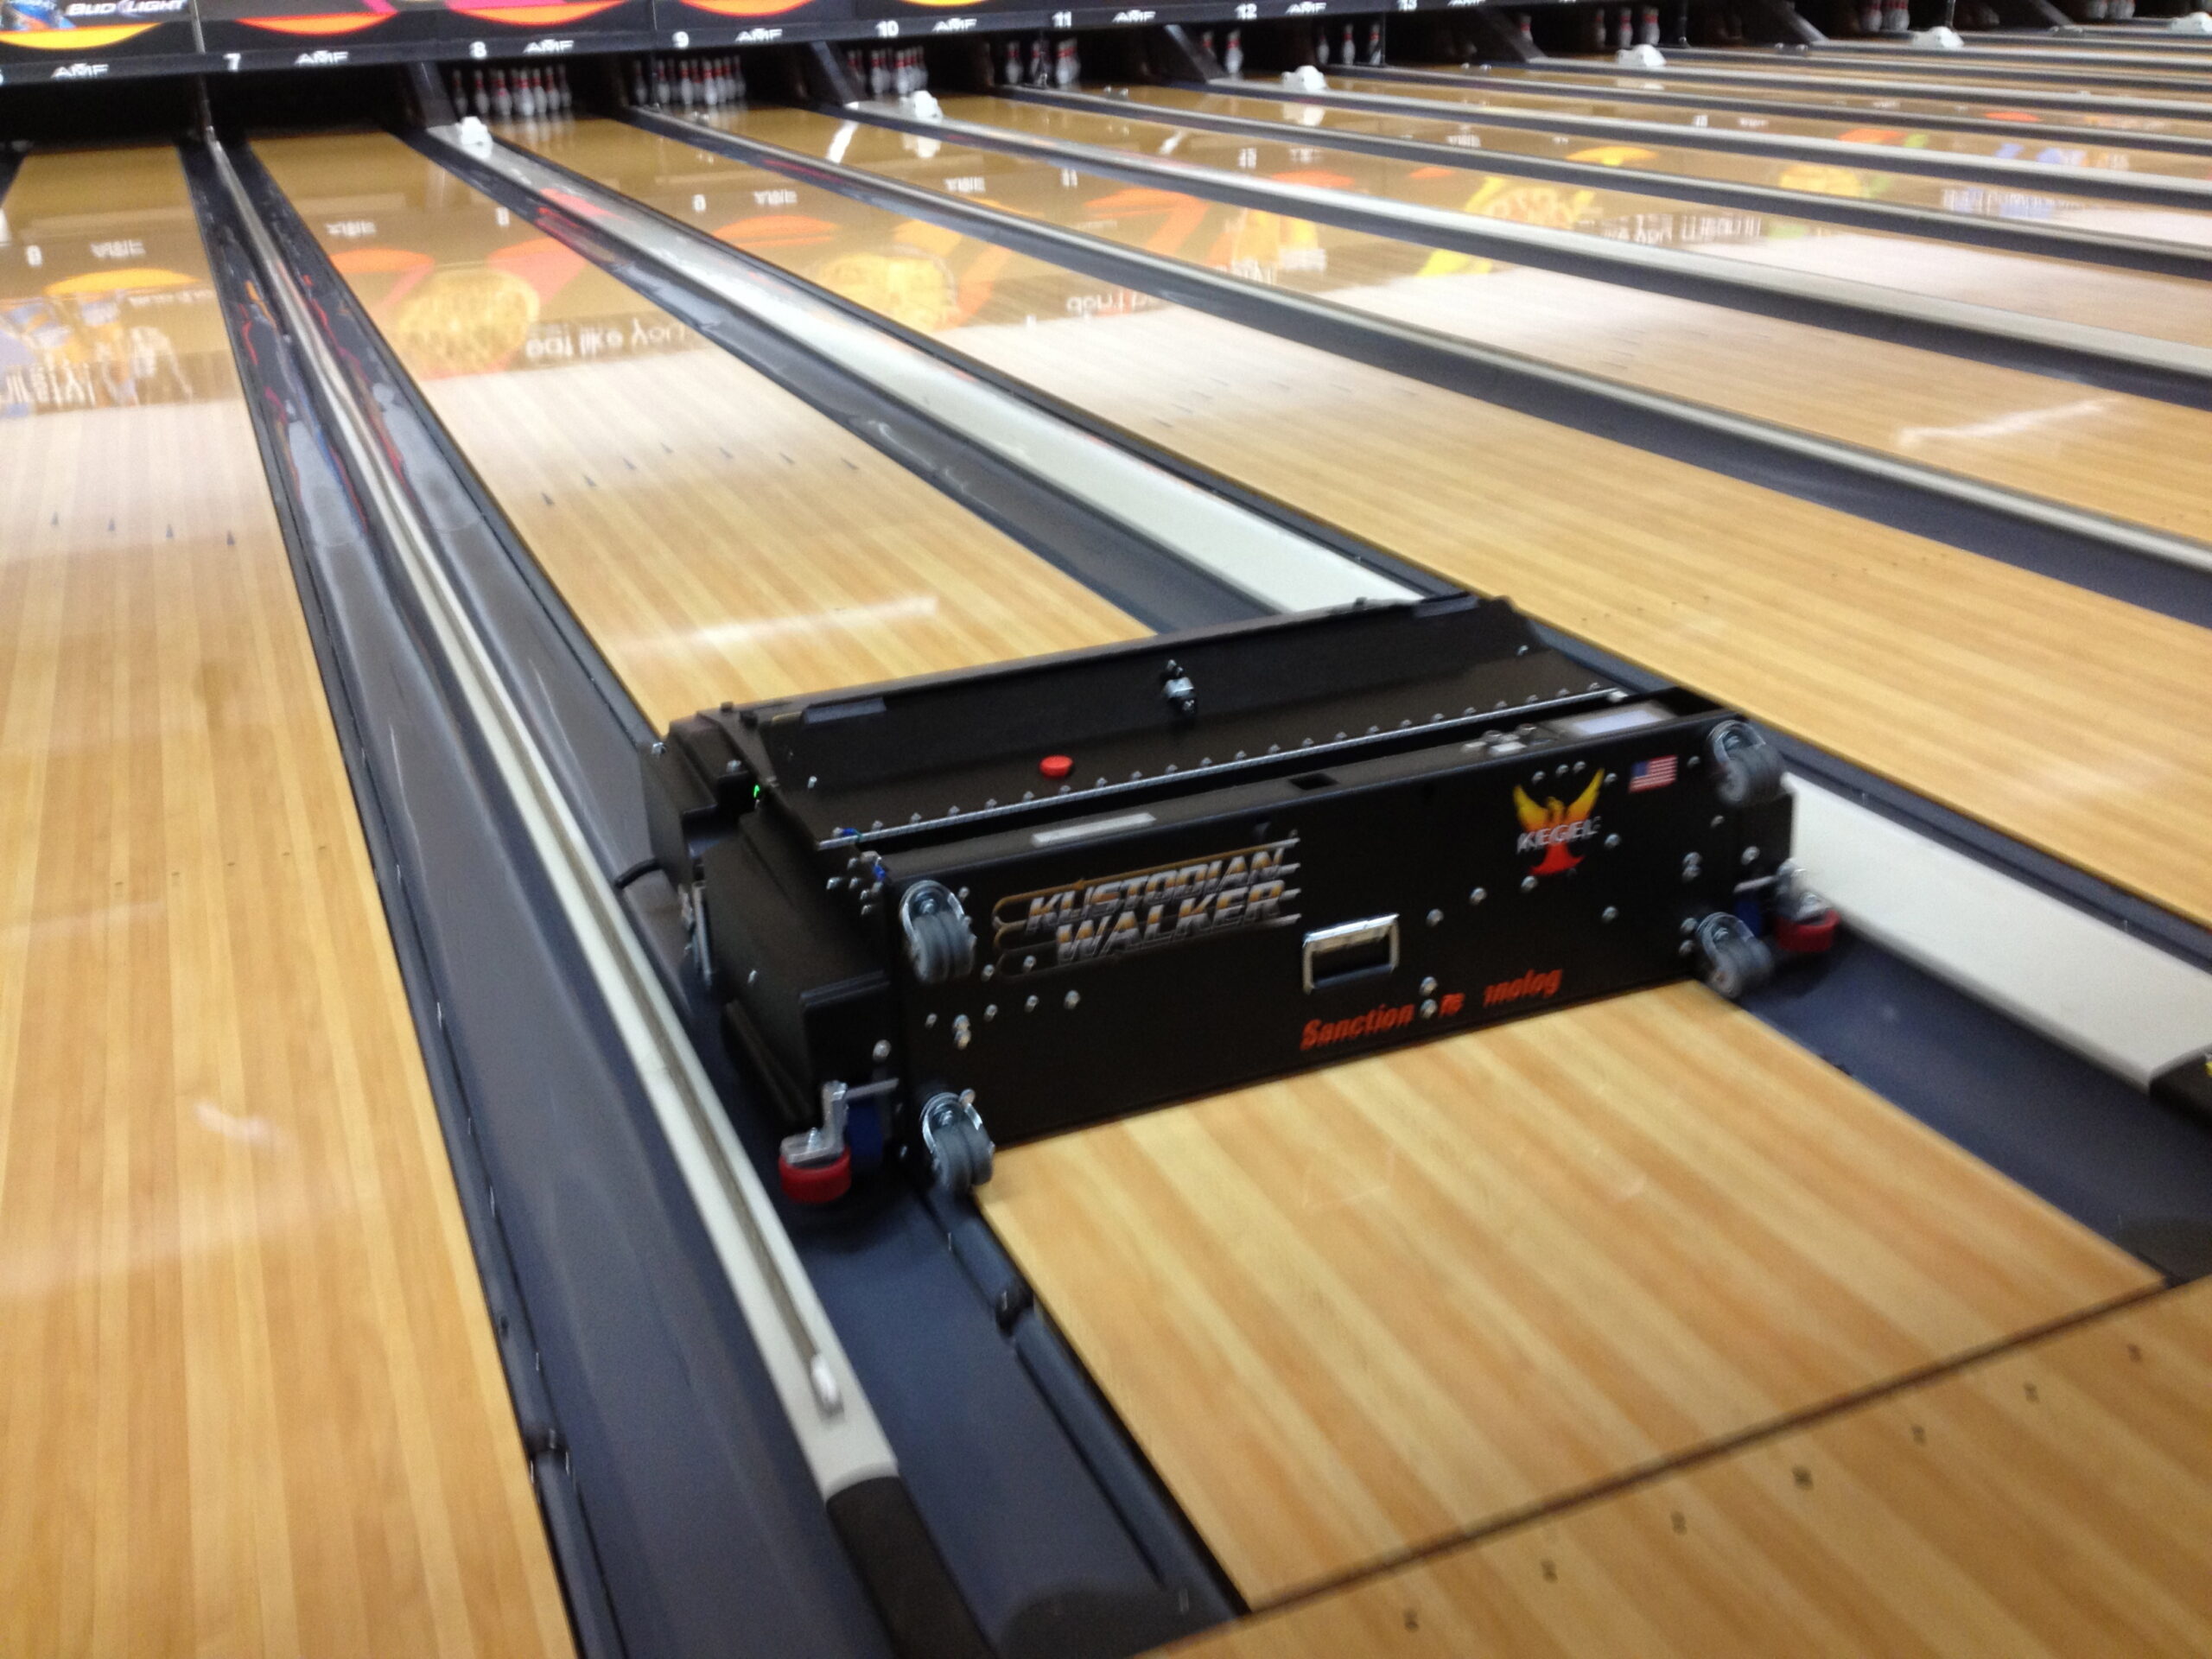 Bowling Alley Oiling Machine: Key to Perfect Lanes!